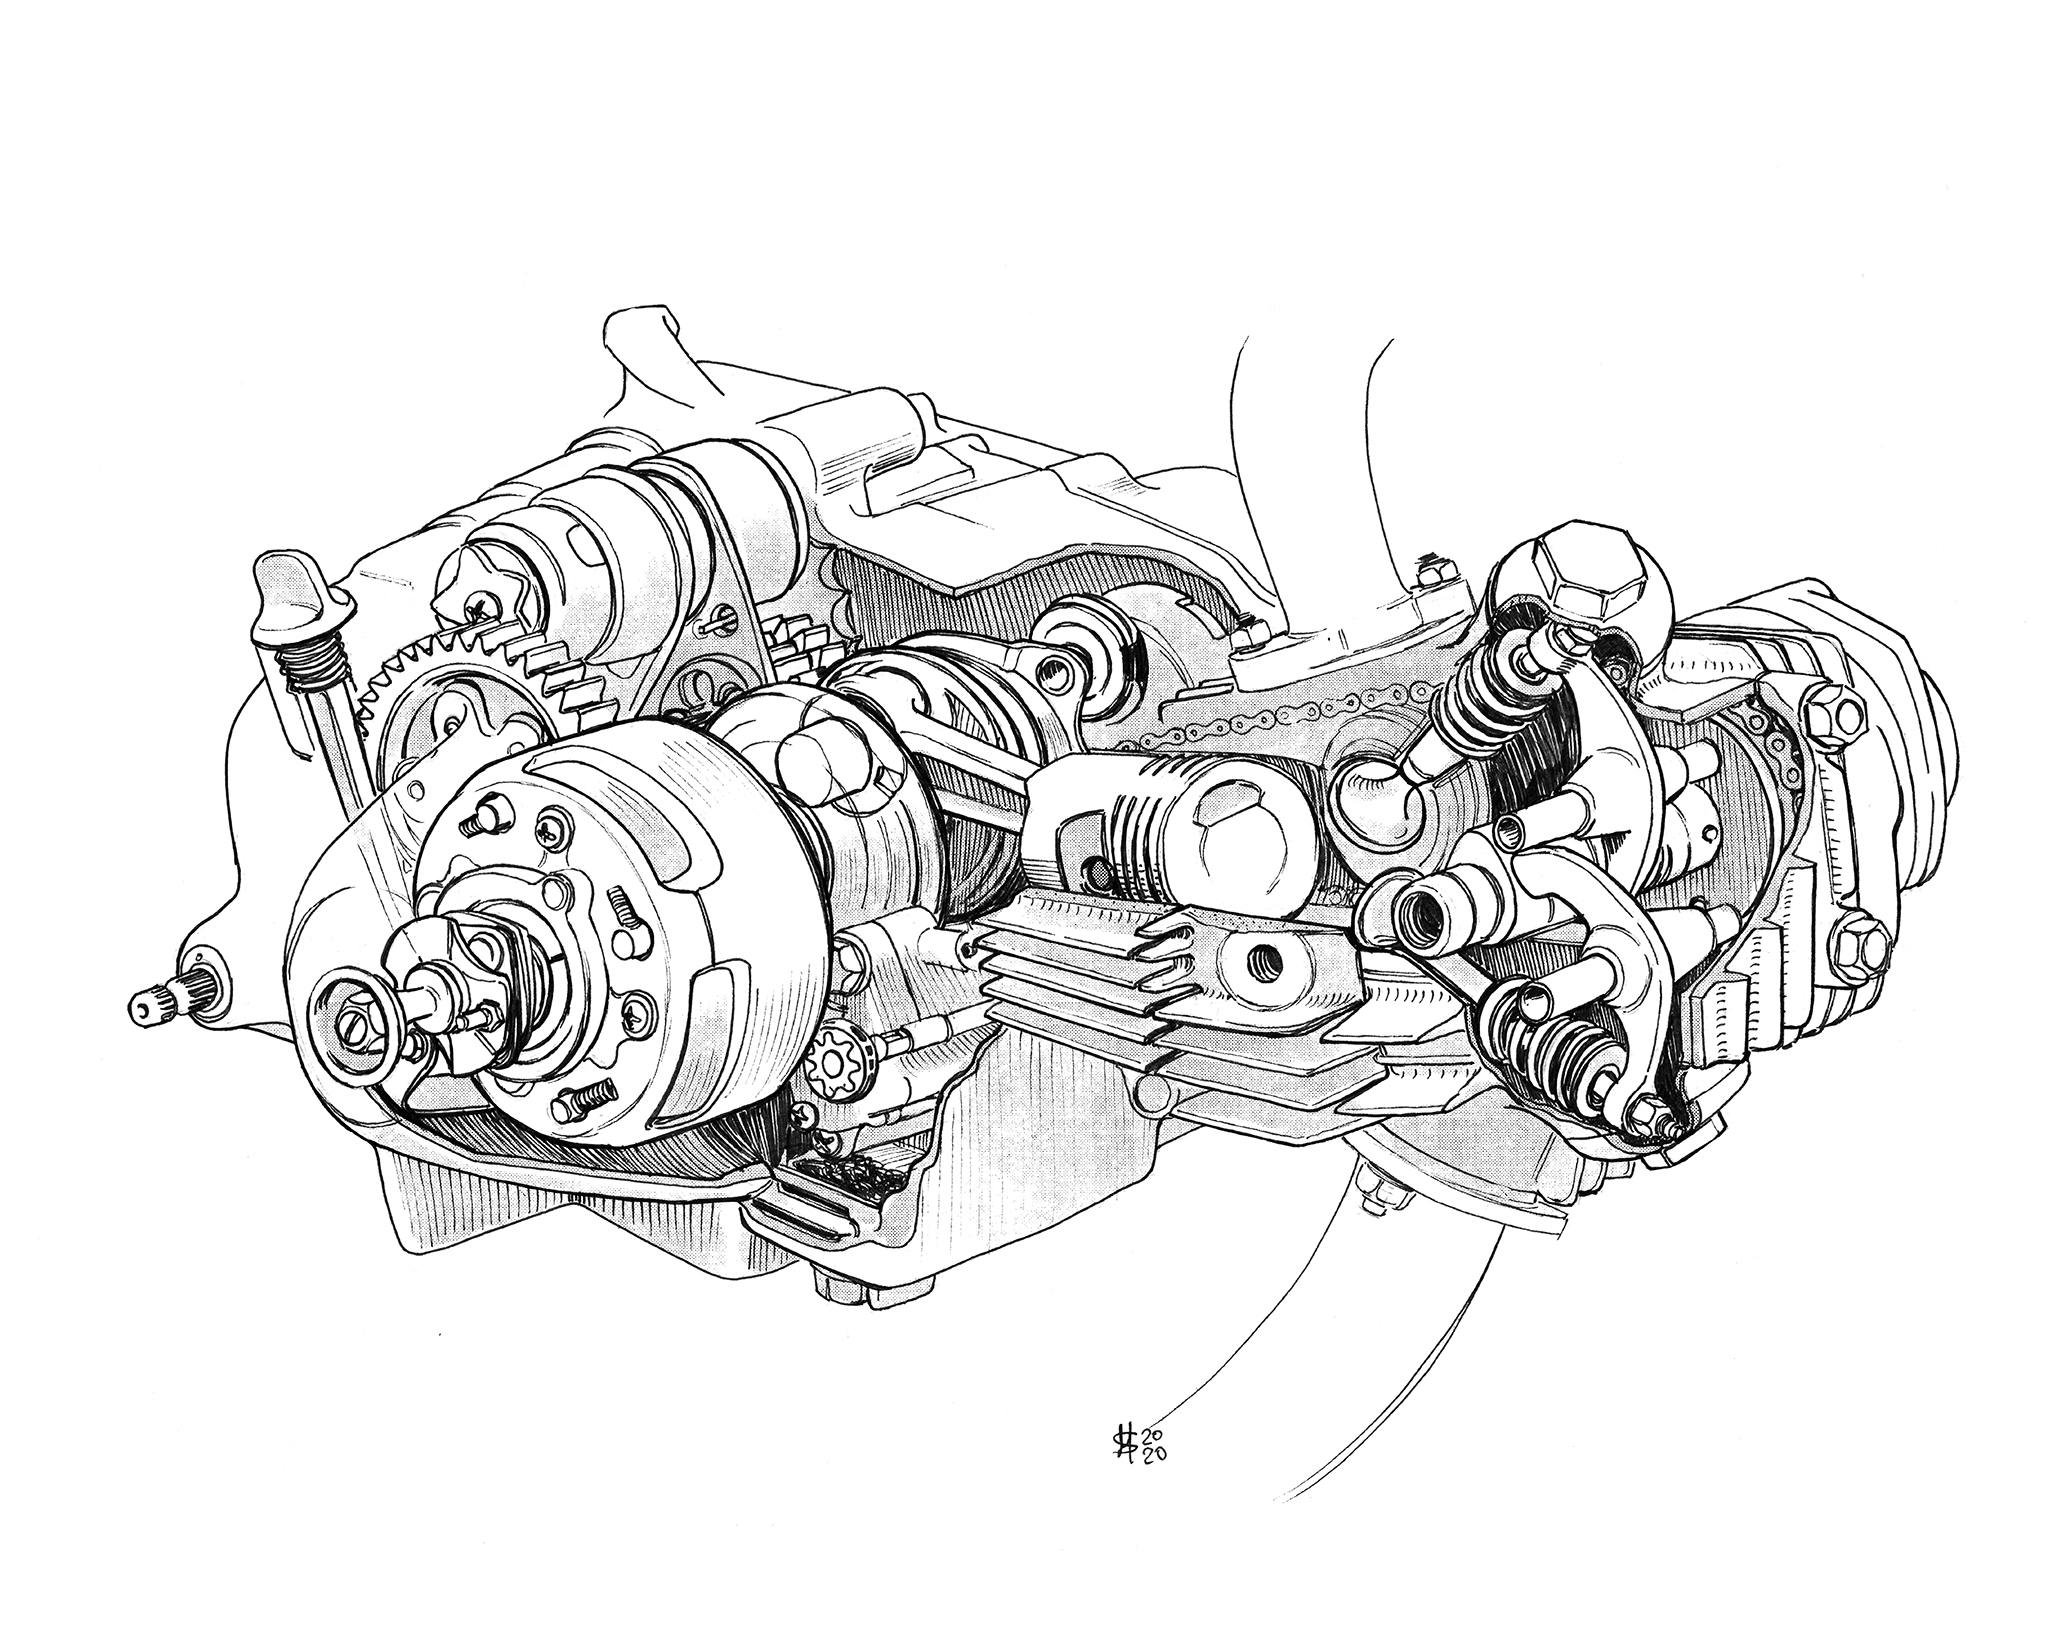 MSquires_STOCK_HondaC100_engine_INK